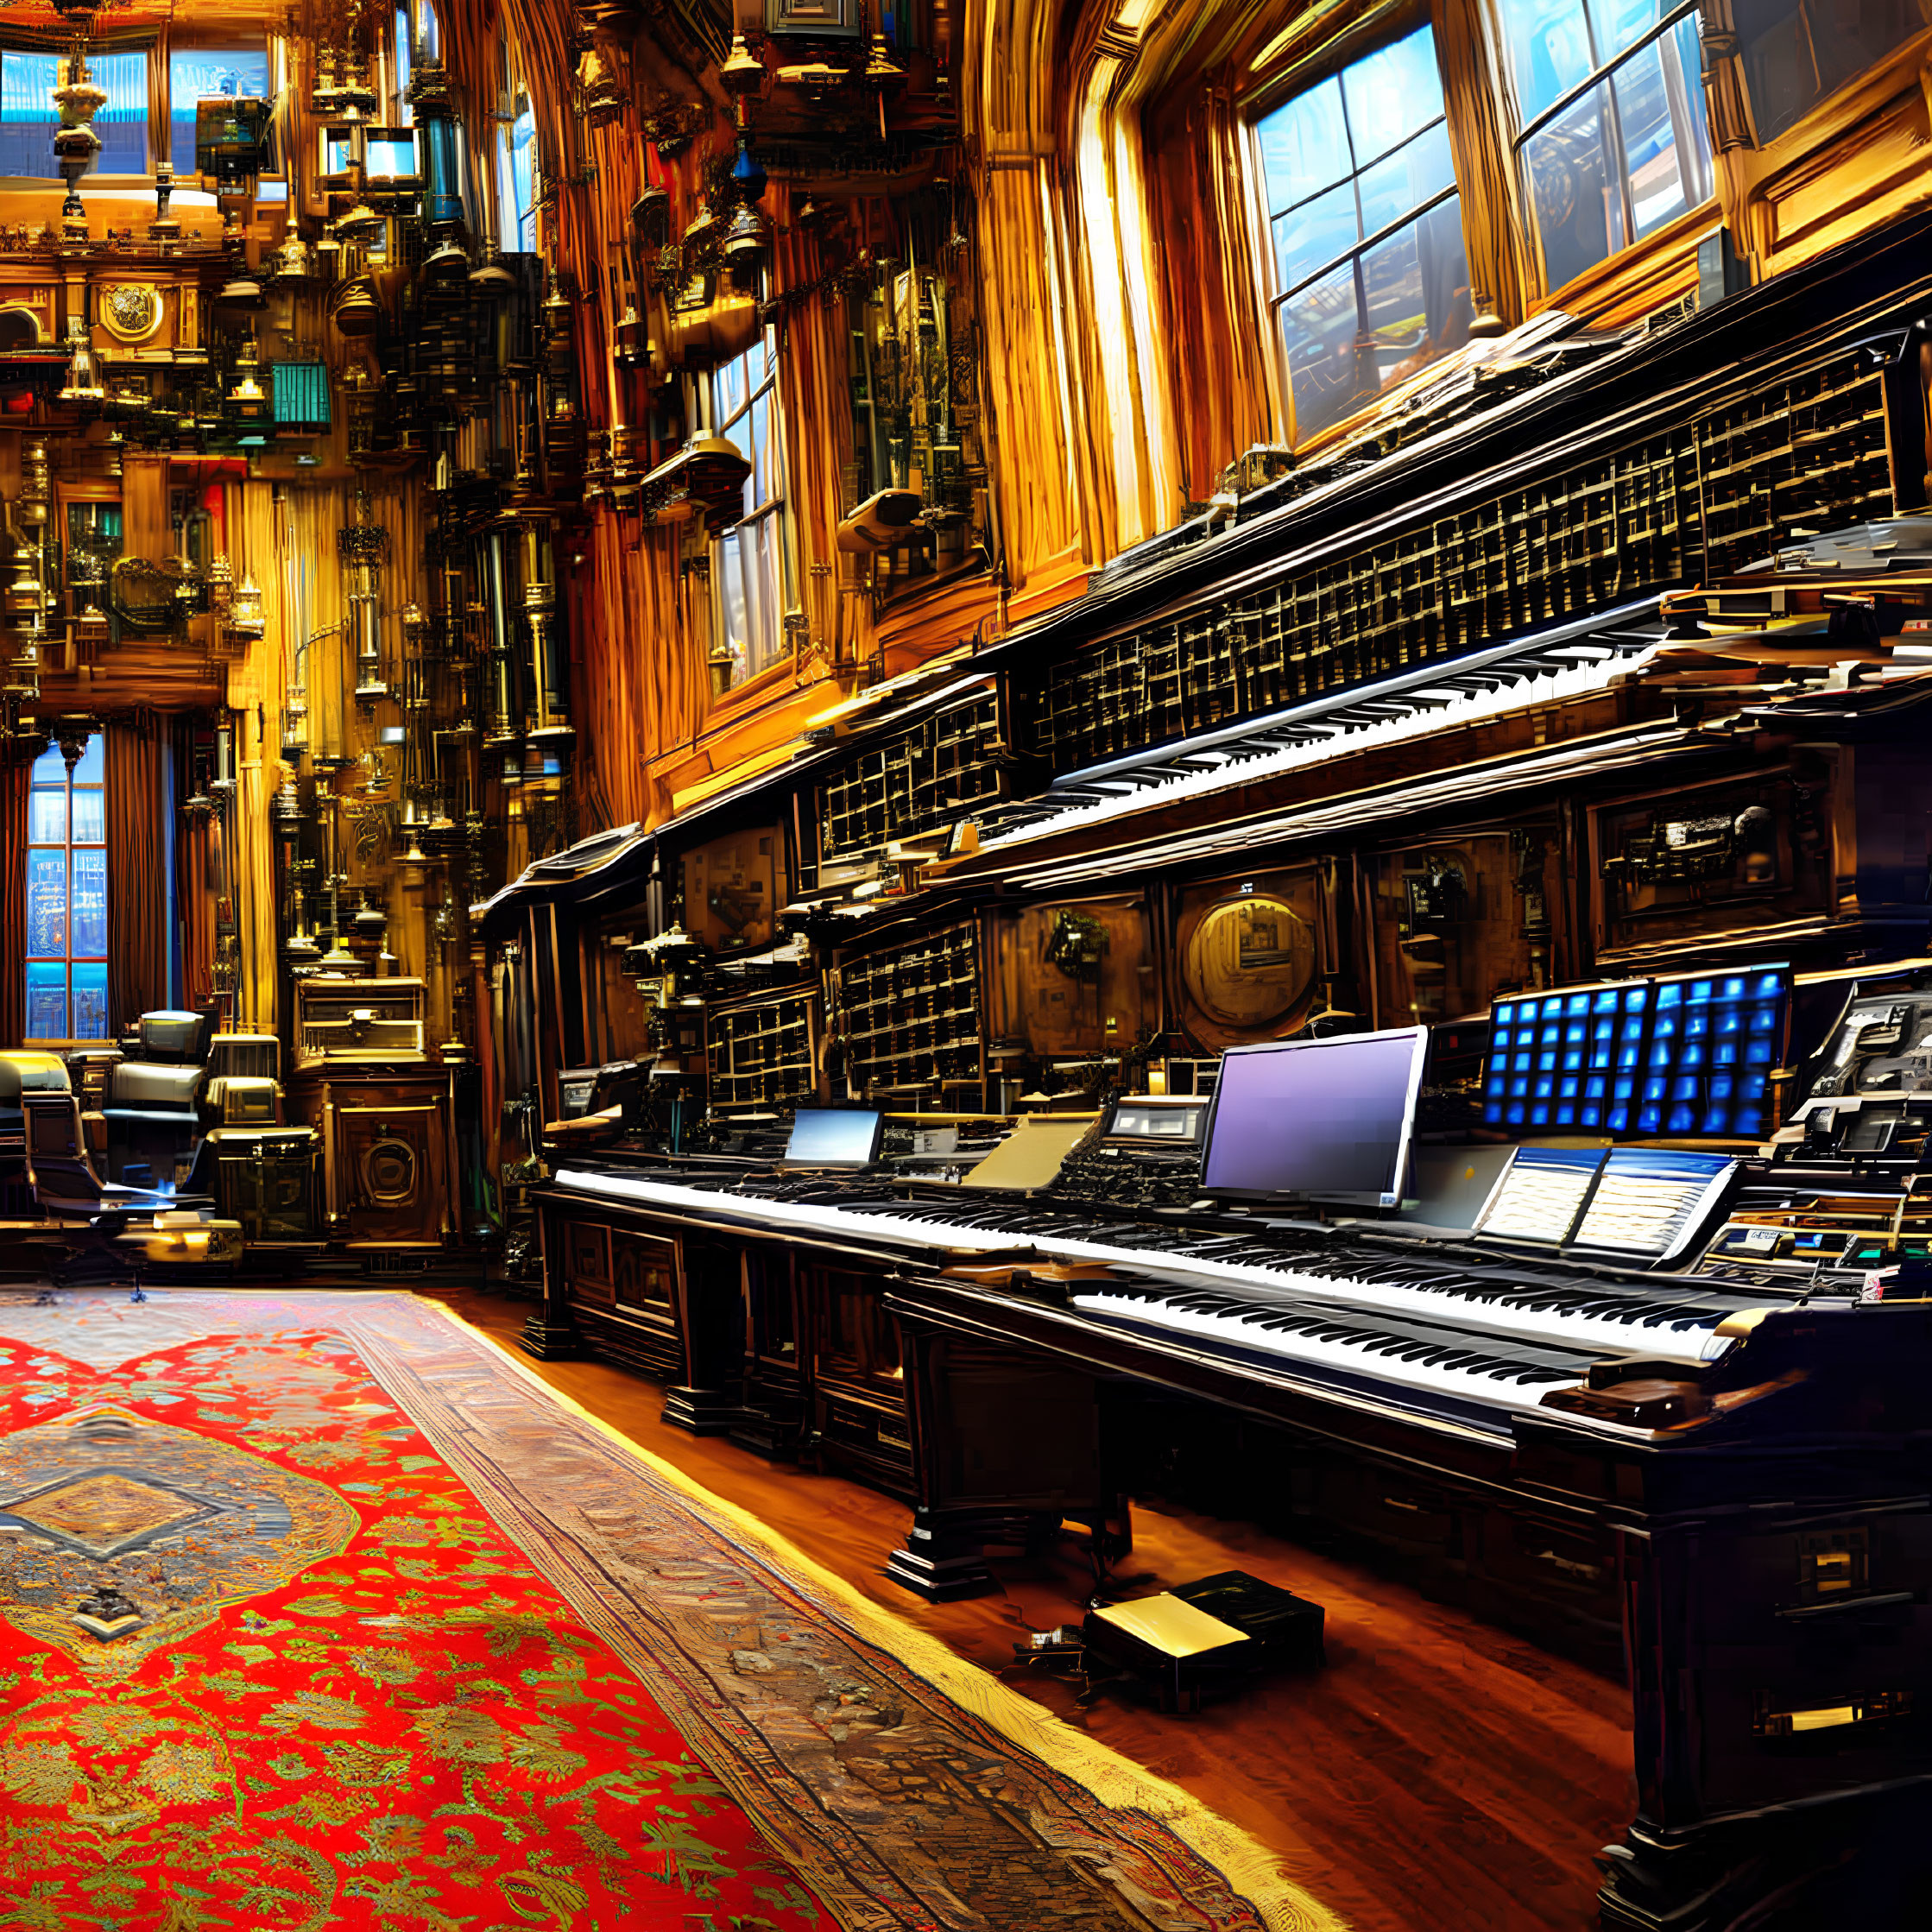 Elegantly decorated room with grand piano and pipe organ console.